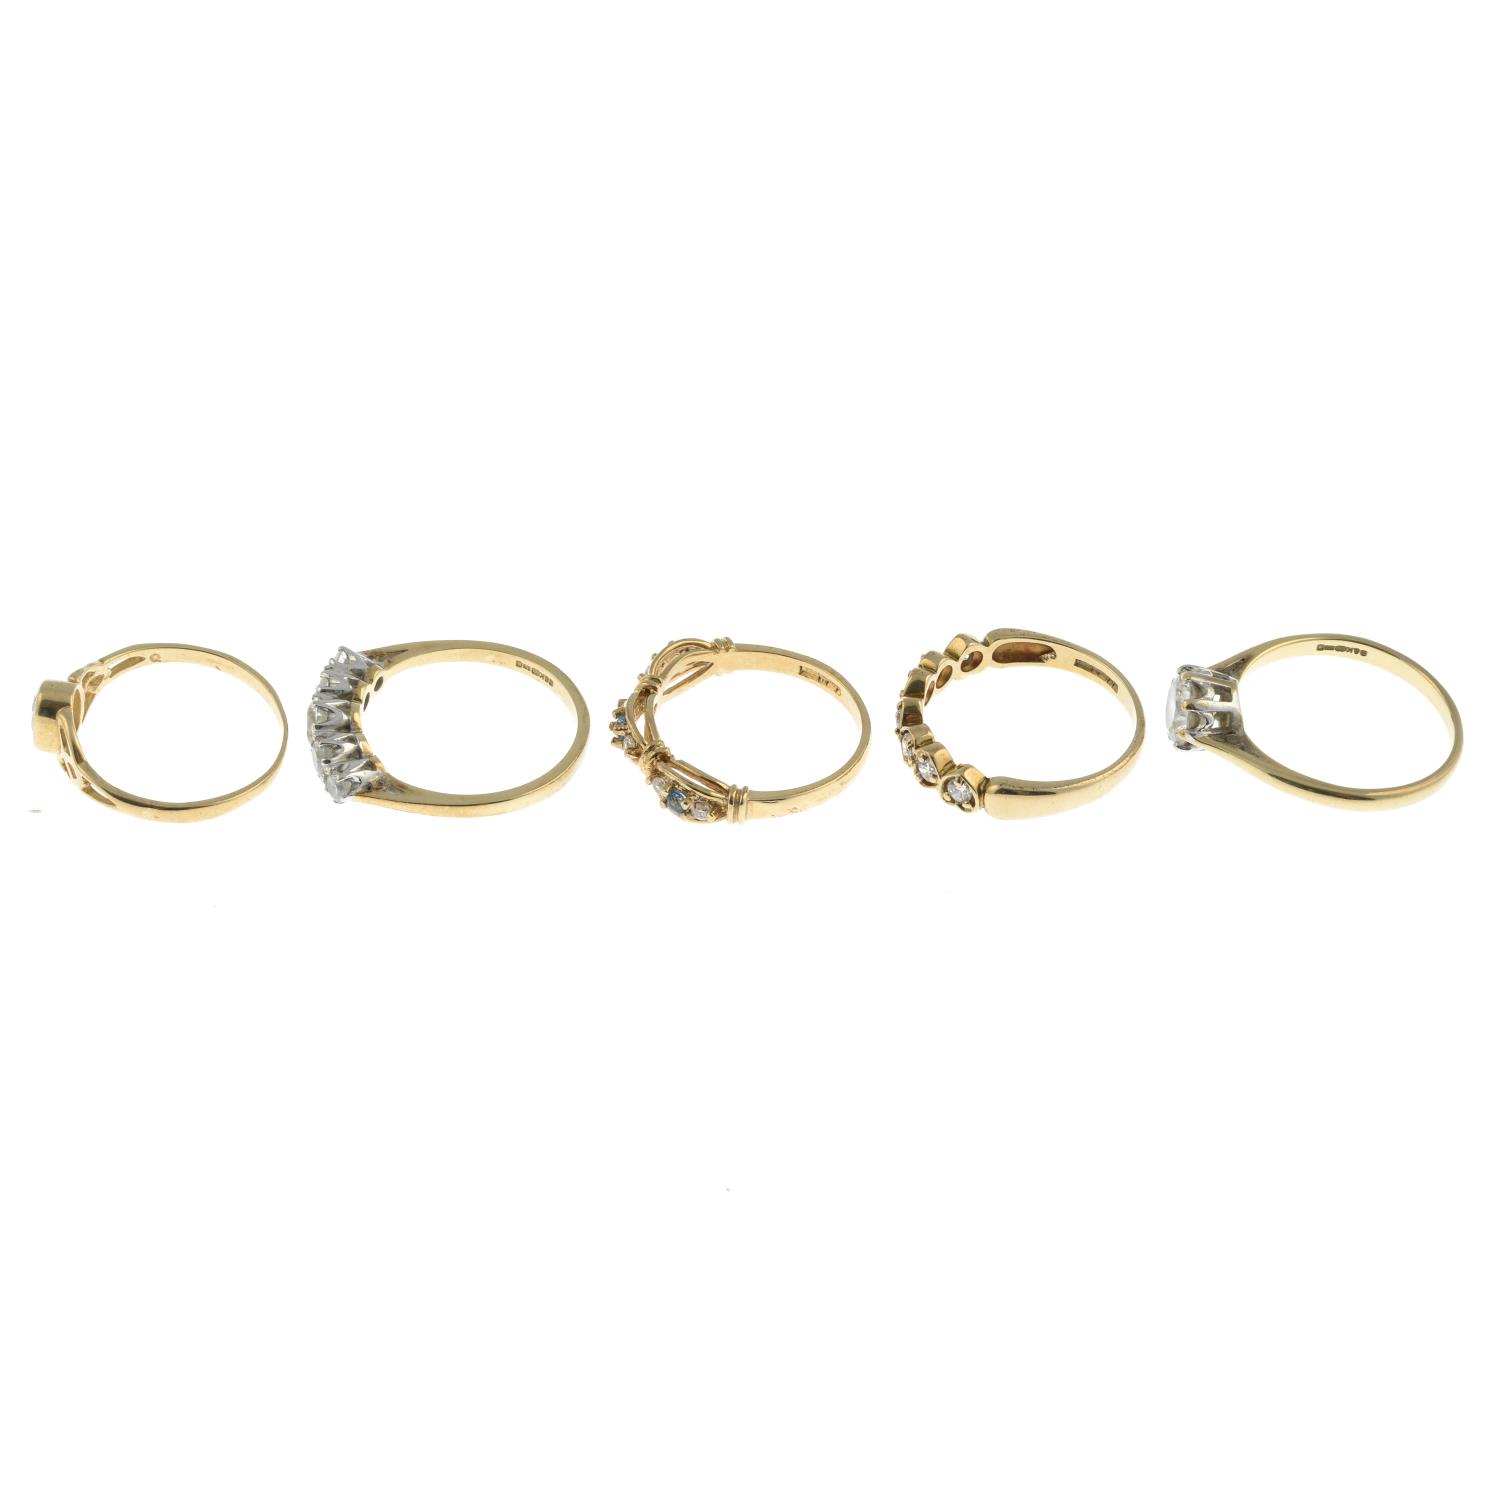 Five 9ct gold cubic zirconia dress rings.Hallmarks for 9ct gold.Ring sizes N1/2 to Q. - Image 3 of 3